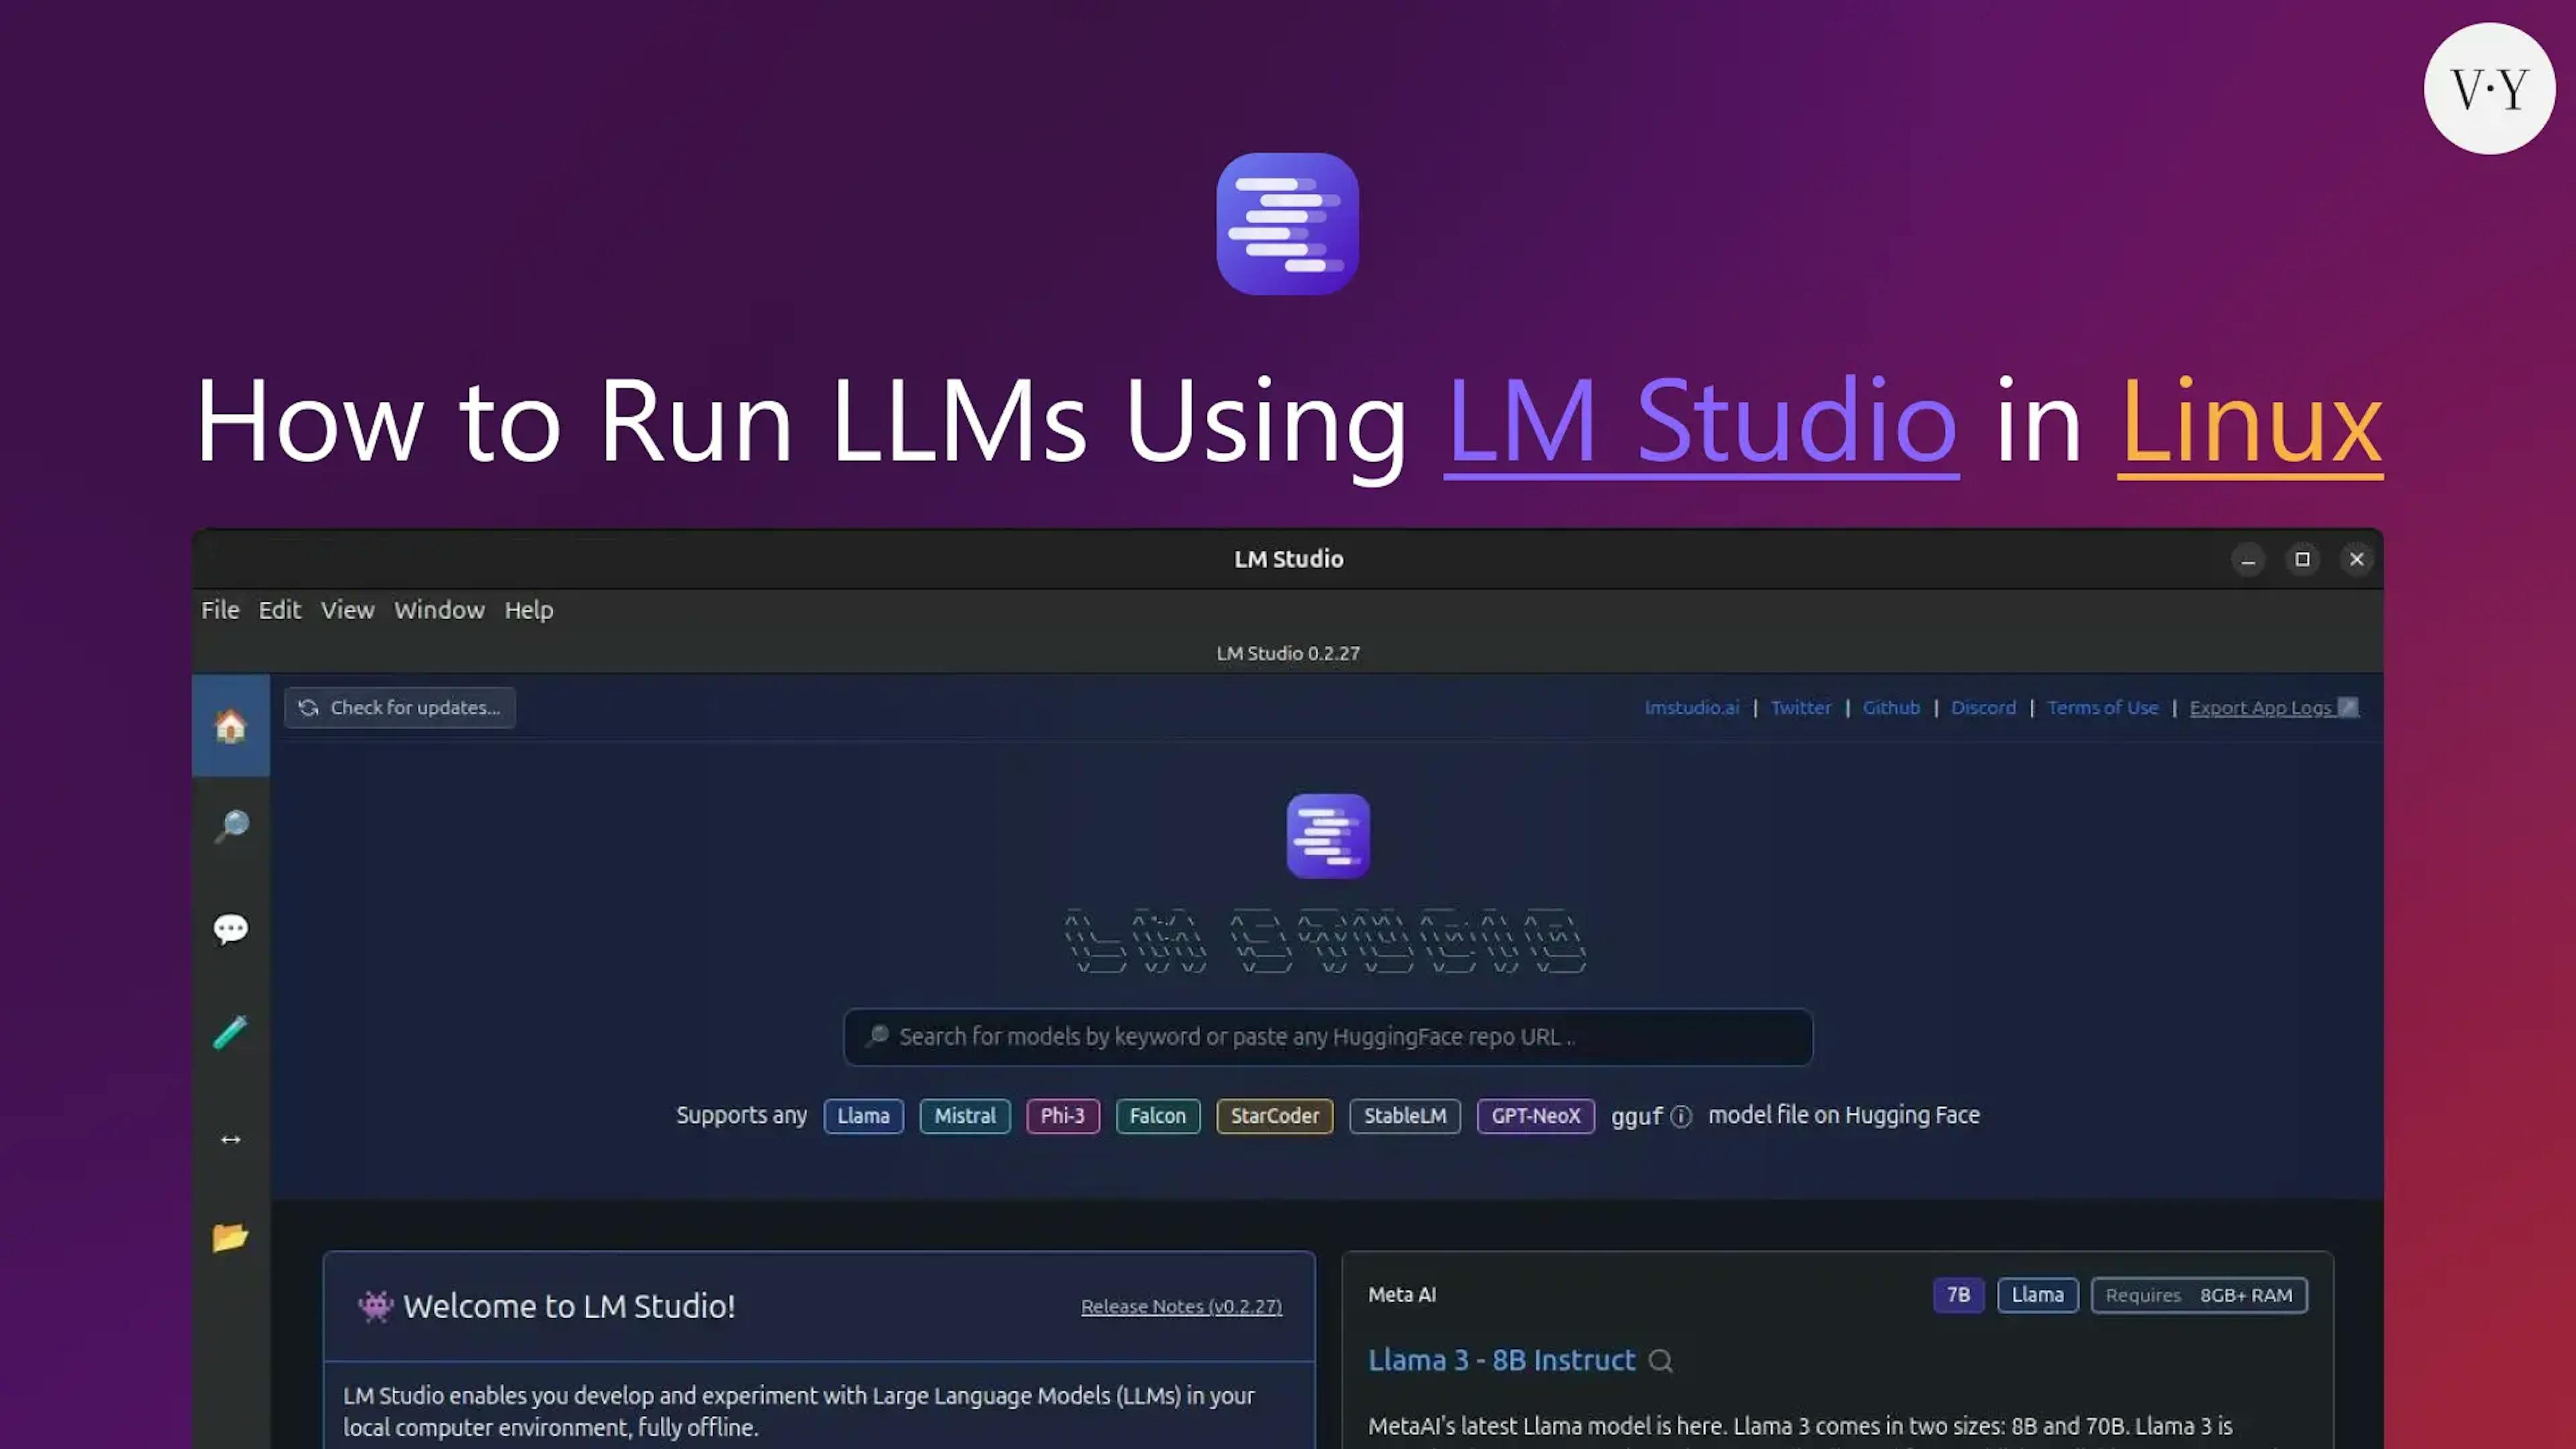 featured image - How to Run LLMs Using LM Studio in Linux (for Beginners)